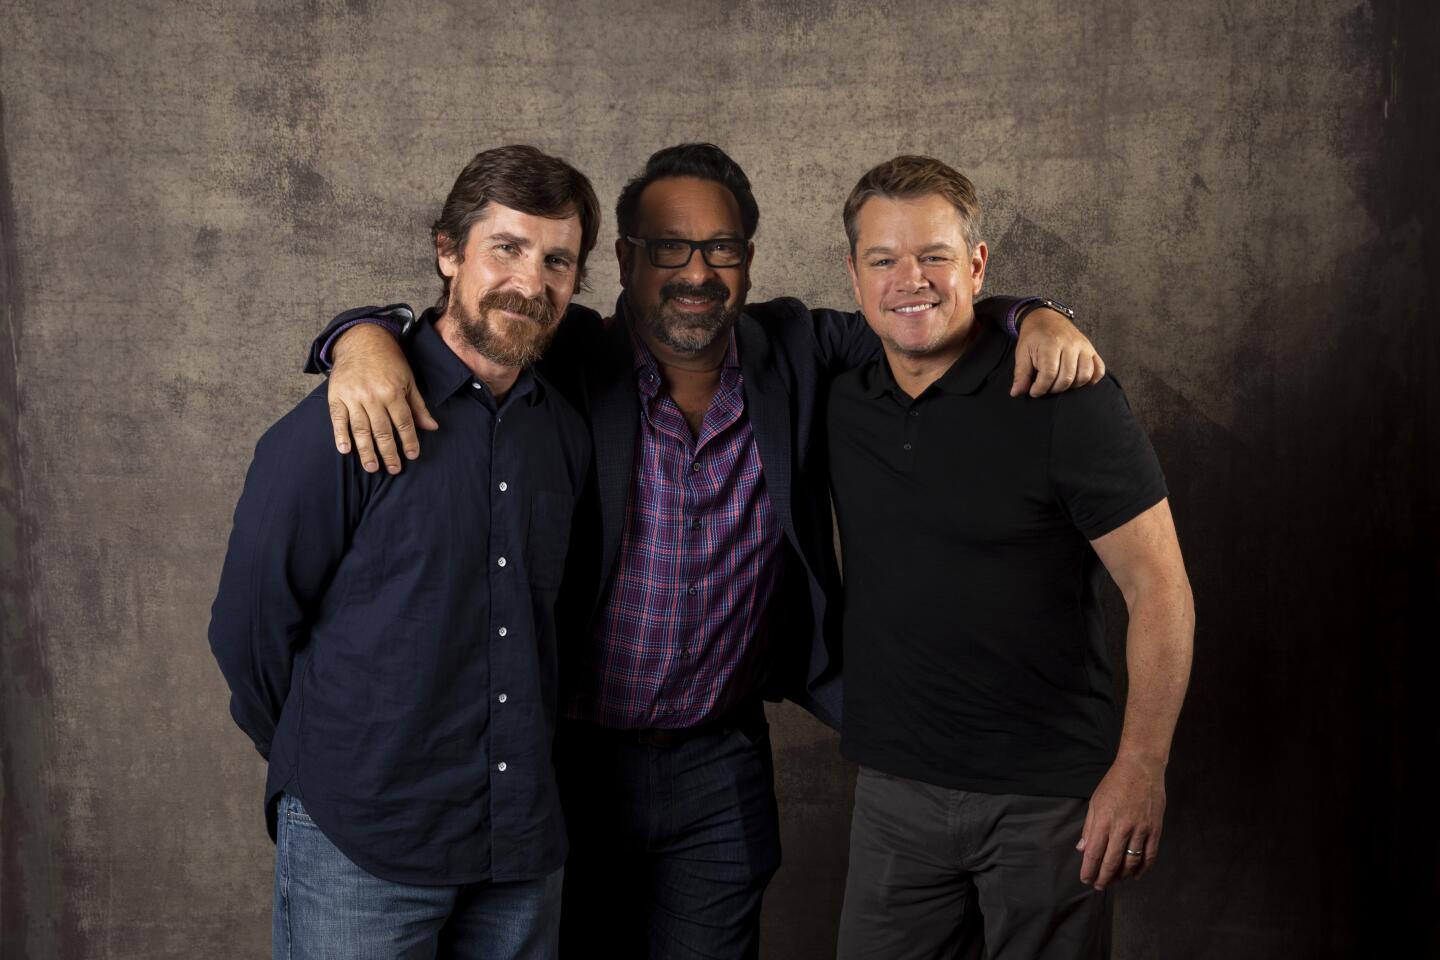 TORONTO, ONT., CAN -- SEPTEMBER 08, 2019-- Actor Christian Bale, director James Mangold and actor Matt Damon, from the film "Ford v Ferrari," photographed in the L.A. Times Photo Studio at the Toronto International Film Festival, in Toronto, Ont., Canada on September 08, 2019. (Jay L. Clendenin / Los Angeles Times)